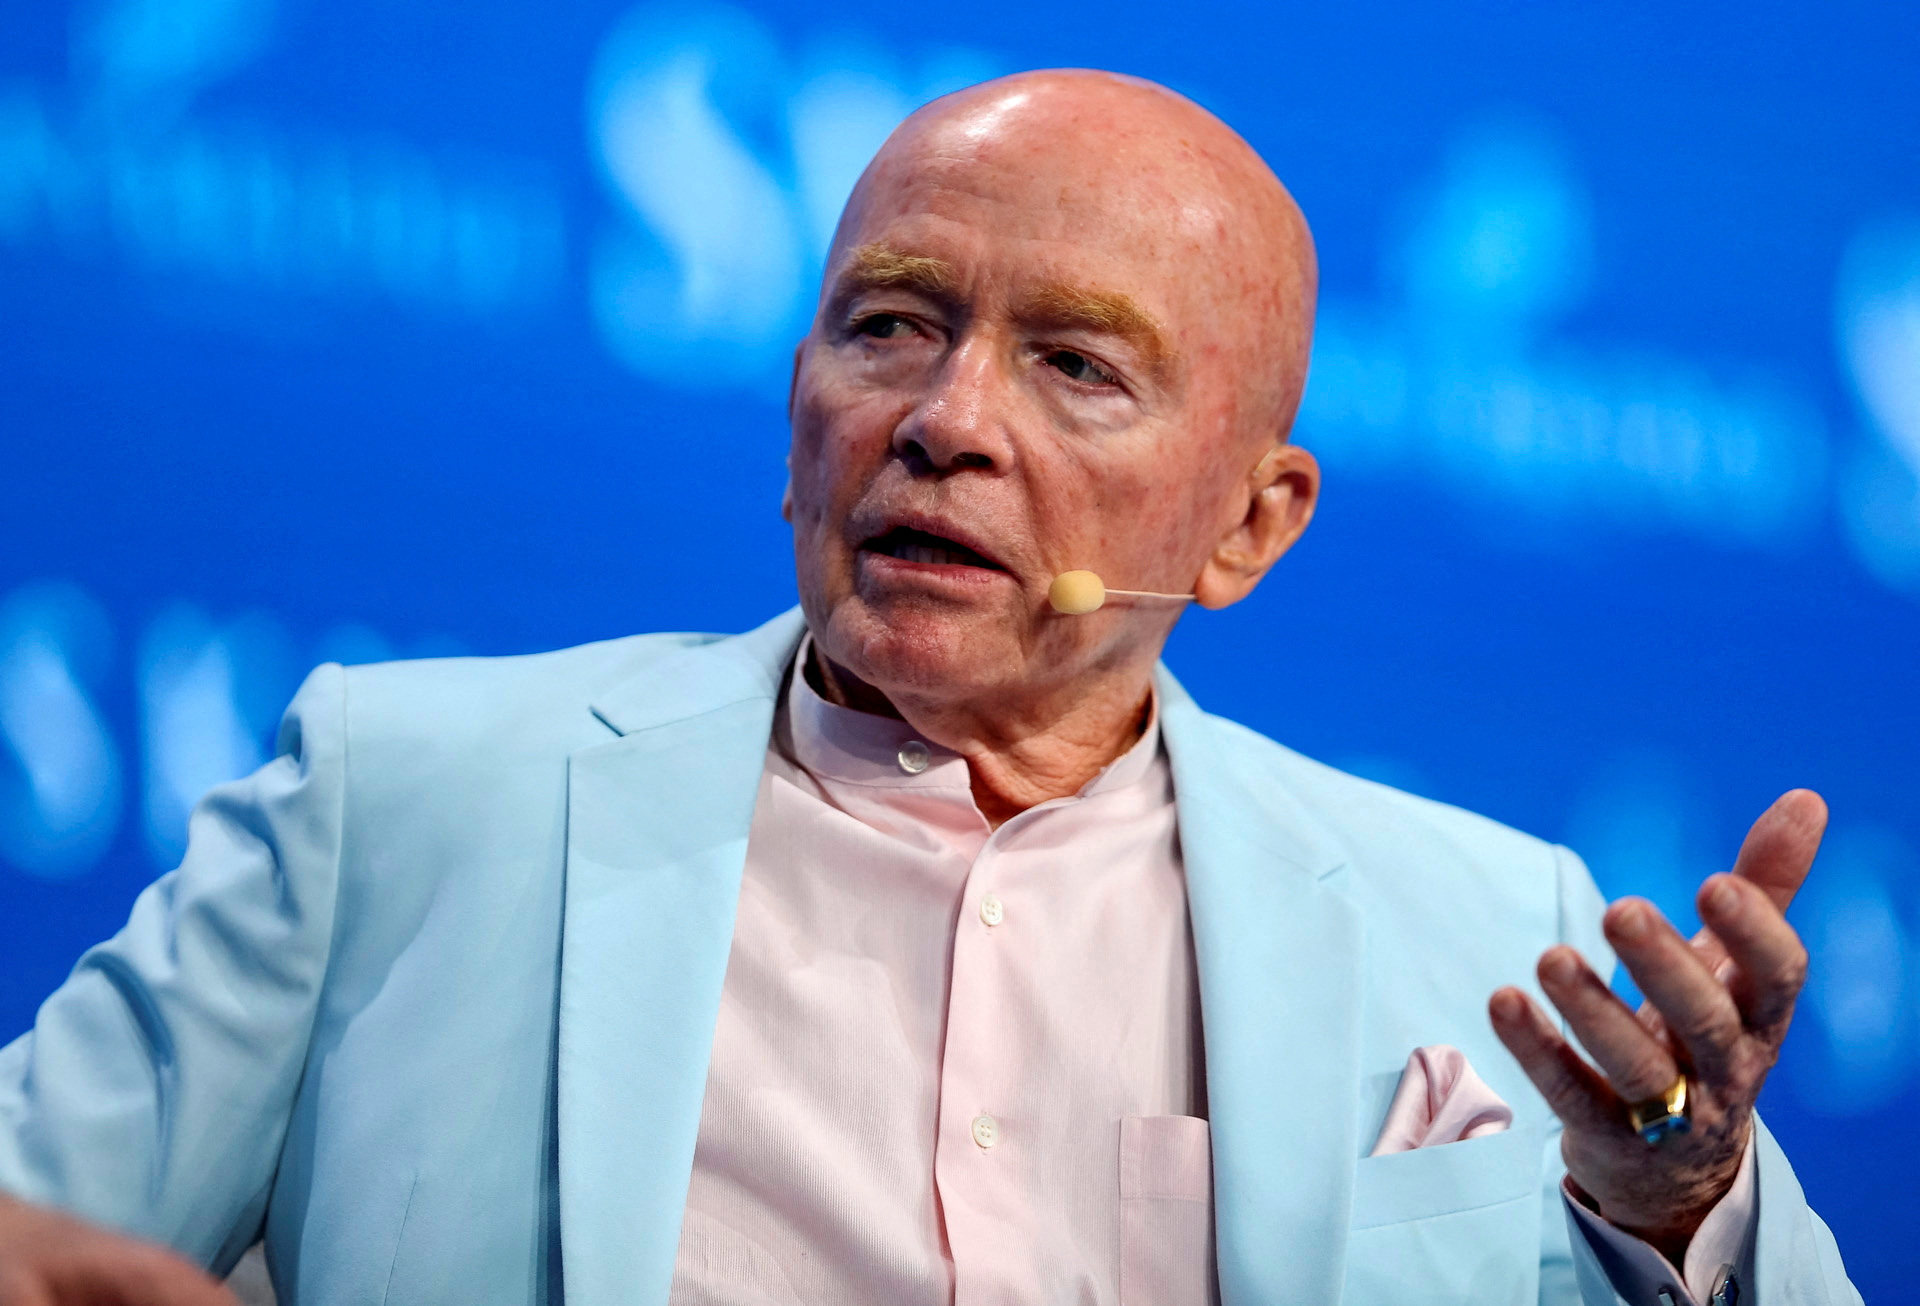 Mark Mobius, the former executive chairman of Templeton Emerging Markets Group. Photo: Reuters